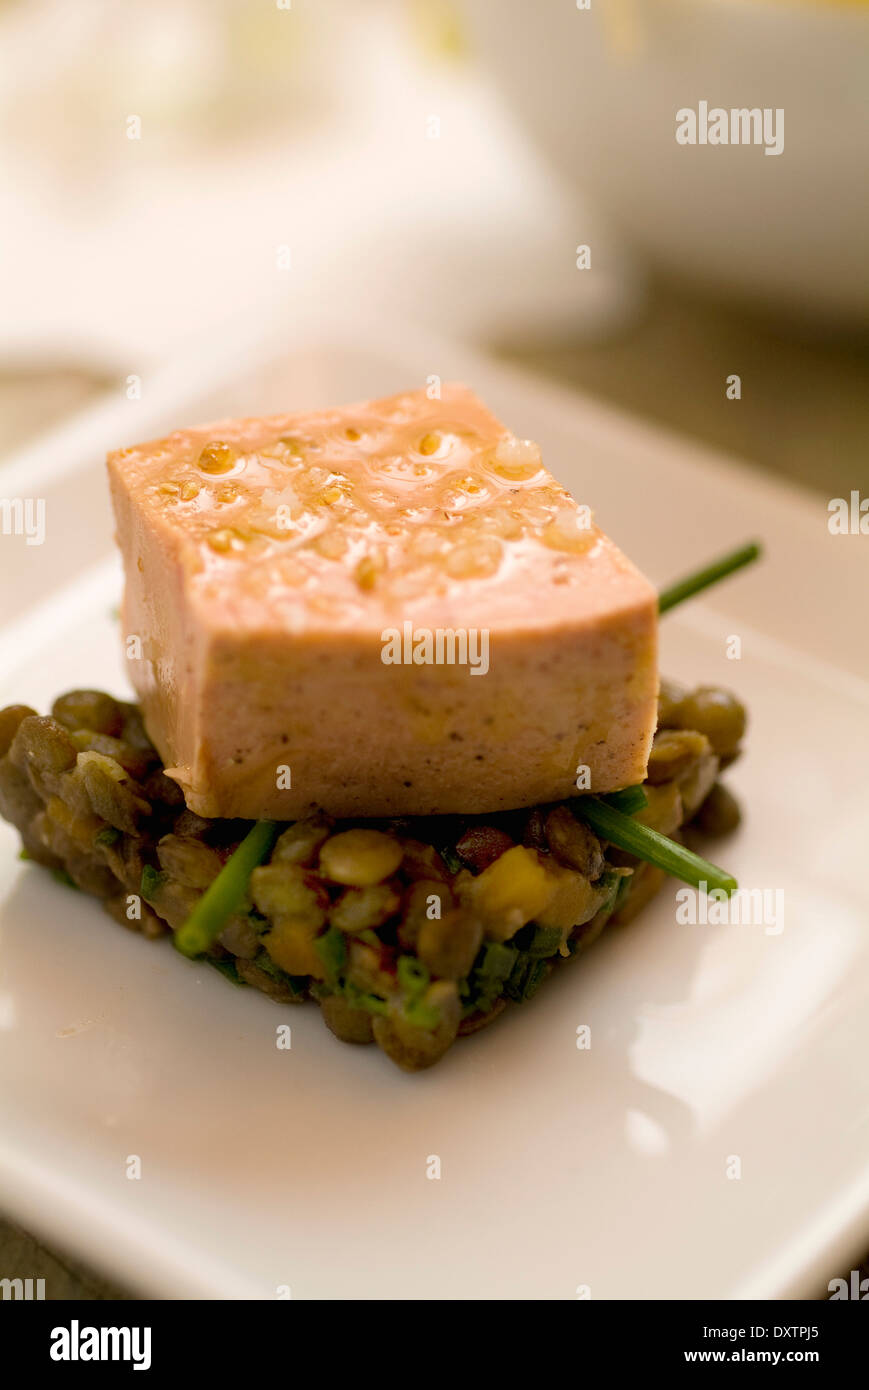 Half-cooked foie gras with lentils Stock Photo